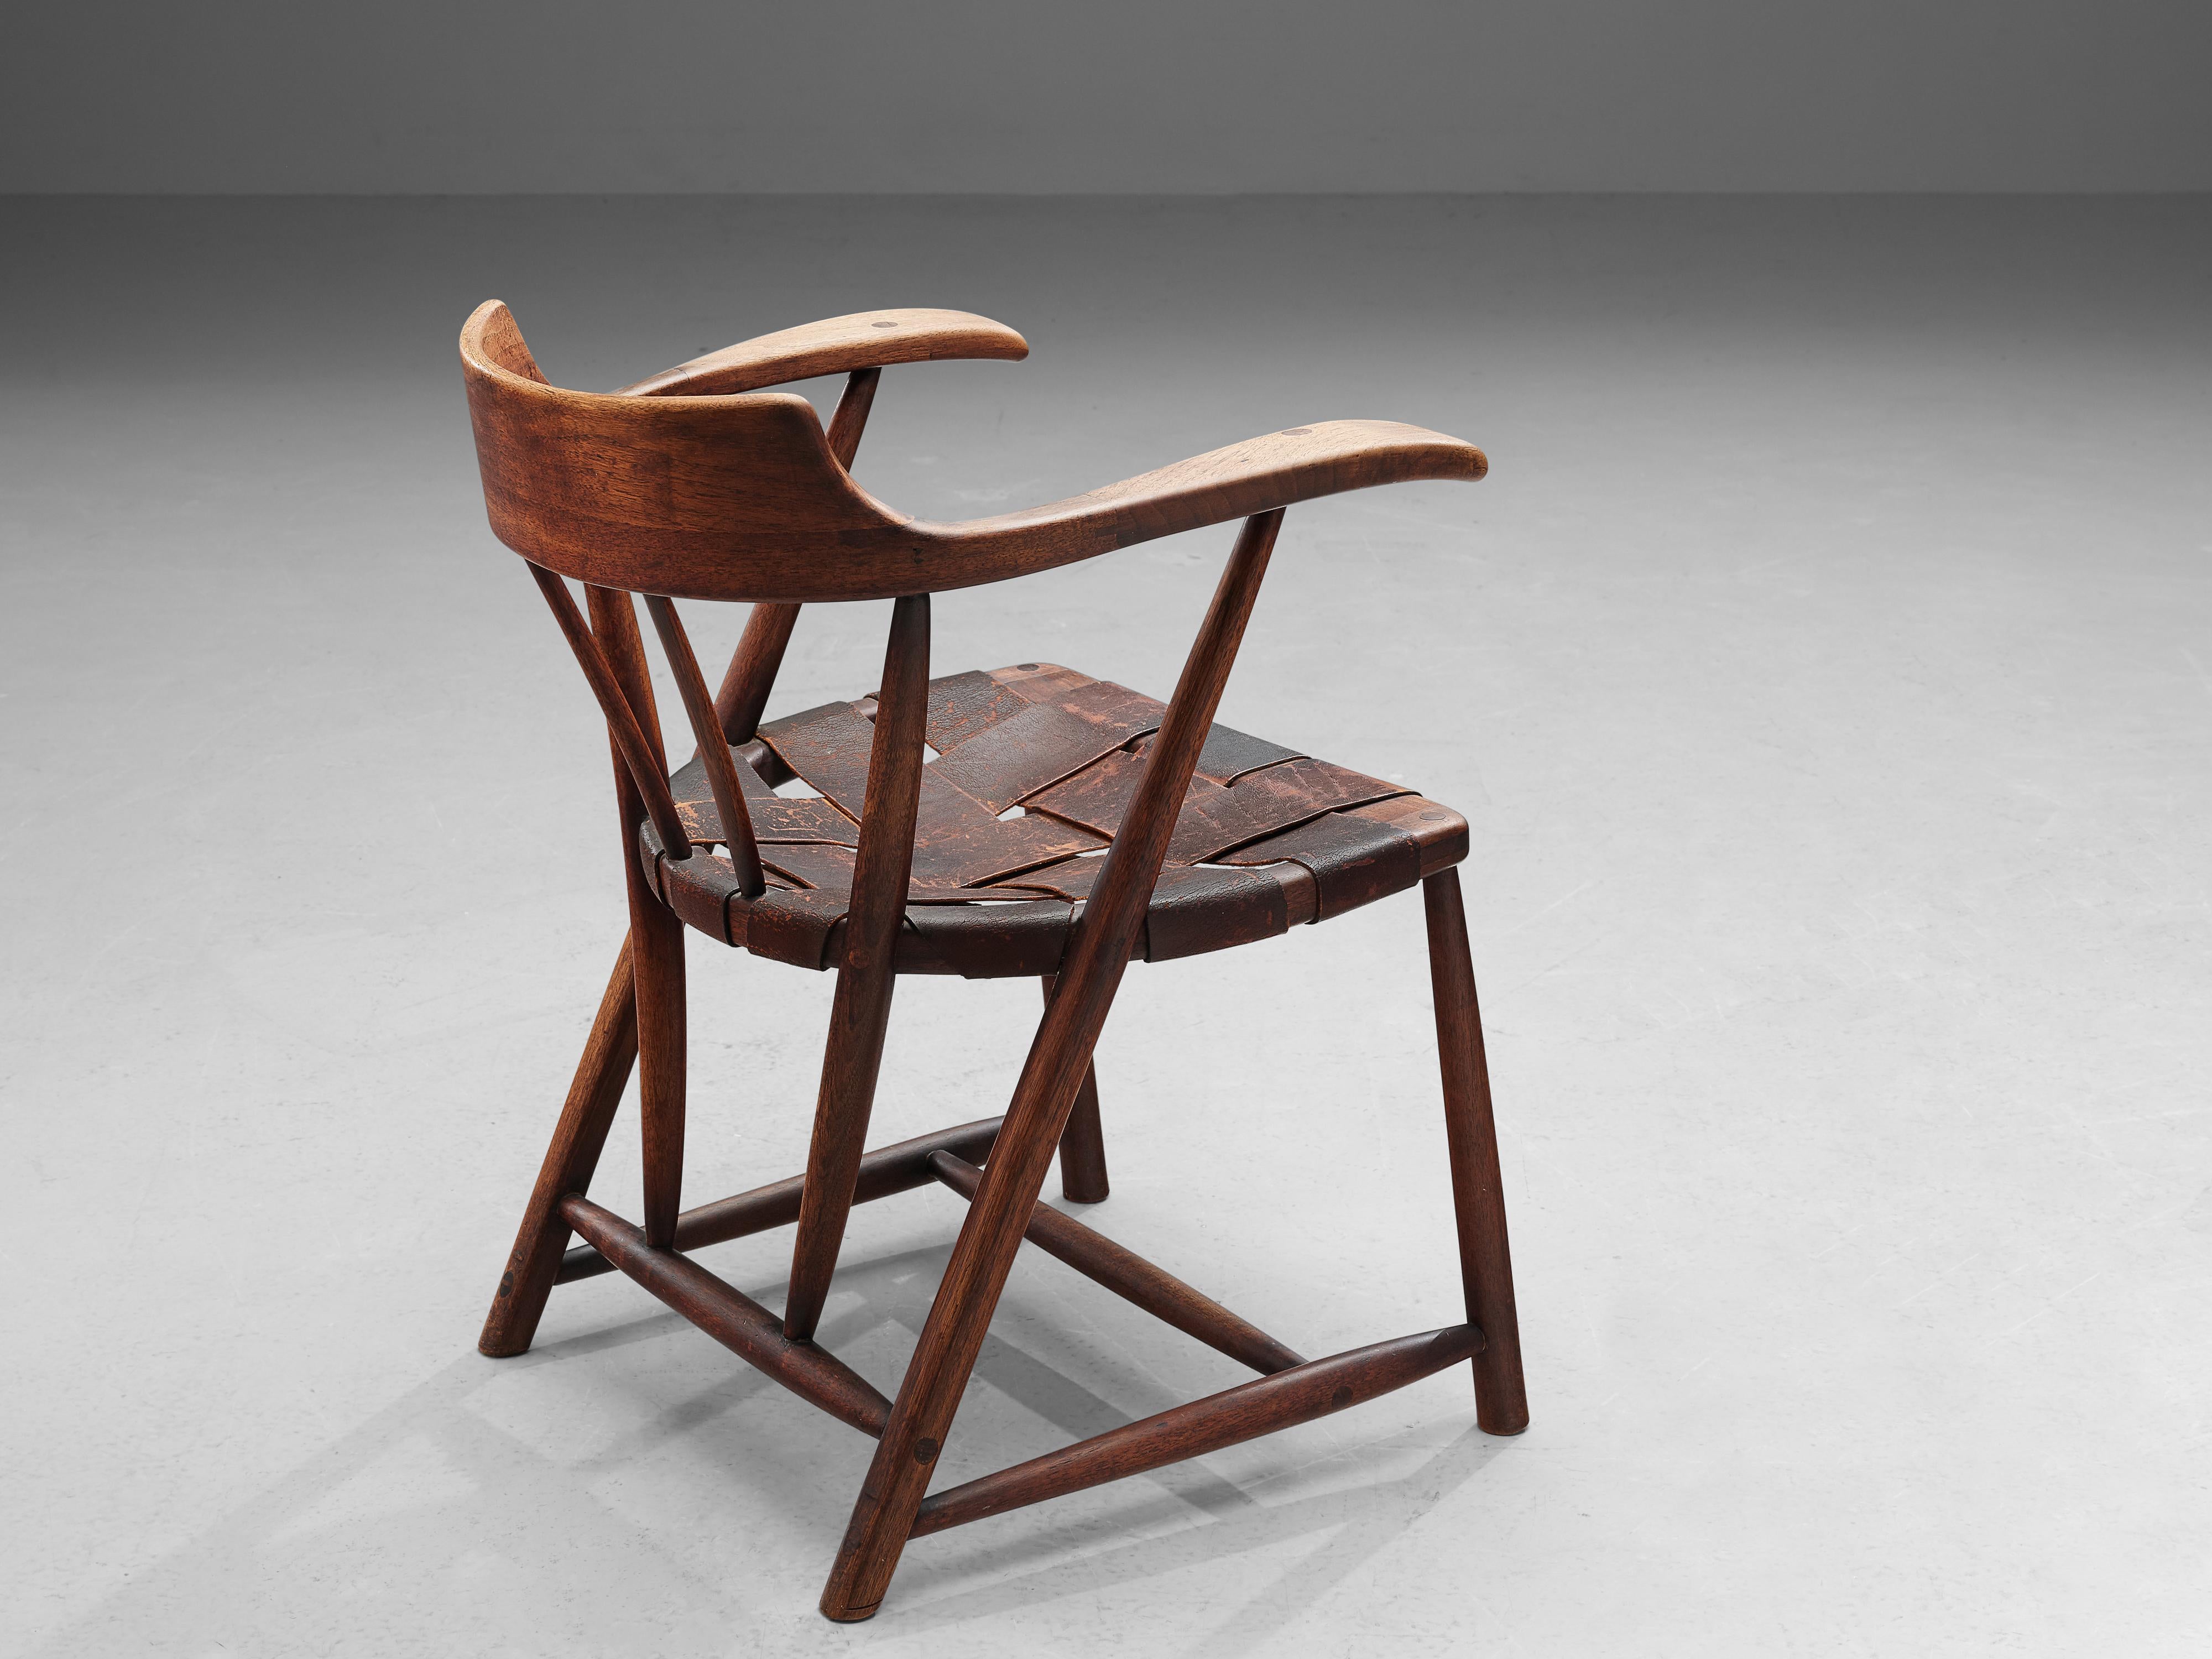 Wharton Esherick, ‘Captain’s Chair’, American walnut, brown leather, United States, 1951

This beautiful ‘Captain’s Chair’ is a striking example of American designer Wharton Esherick’s oeuvre. The chair is one of the first ones ever made as it was